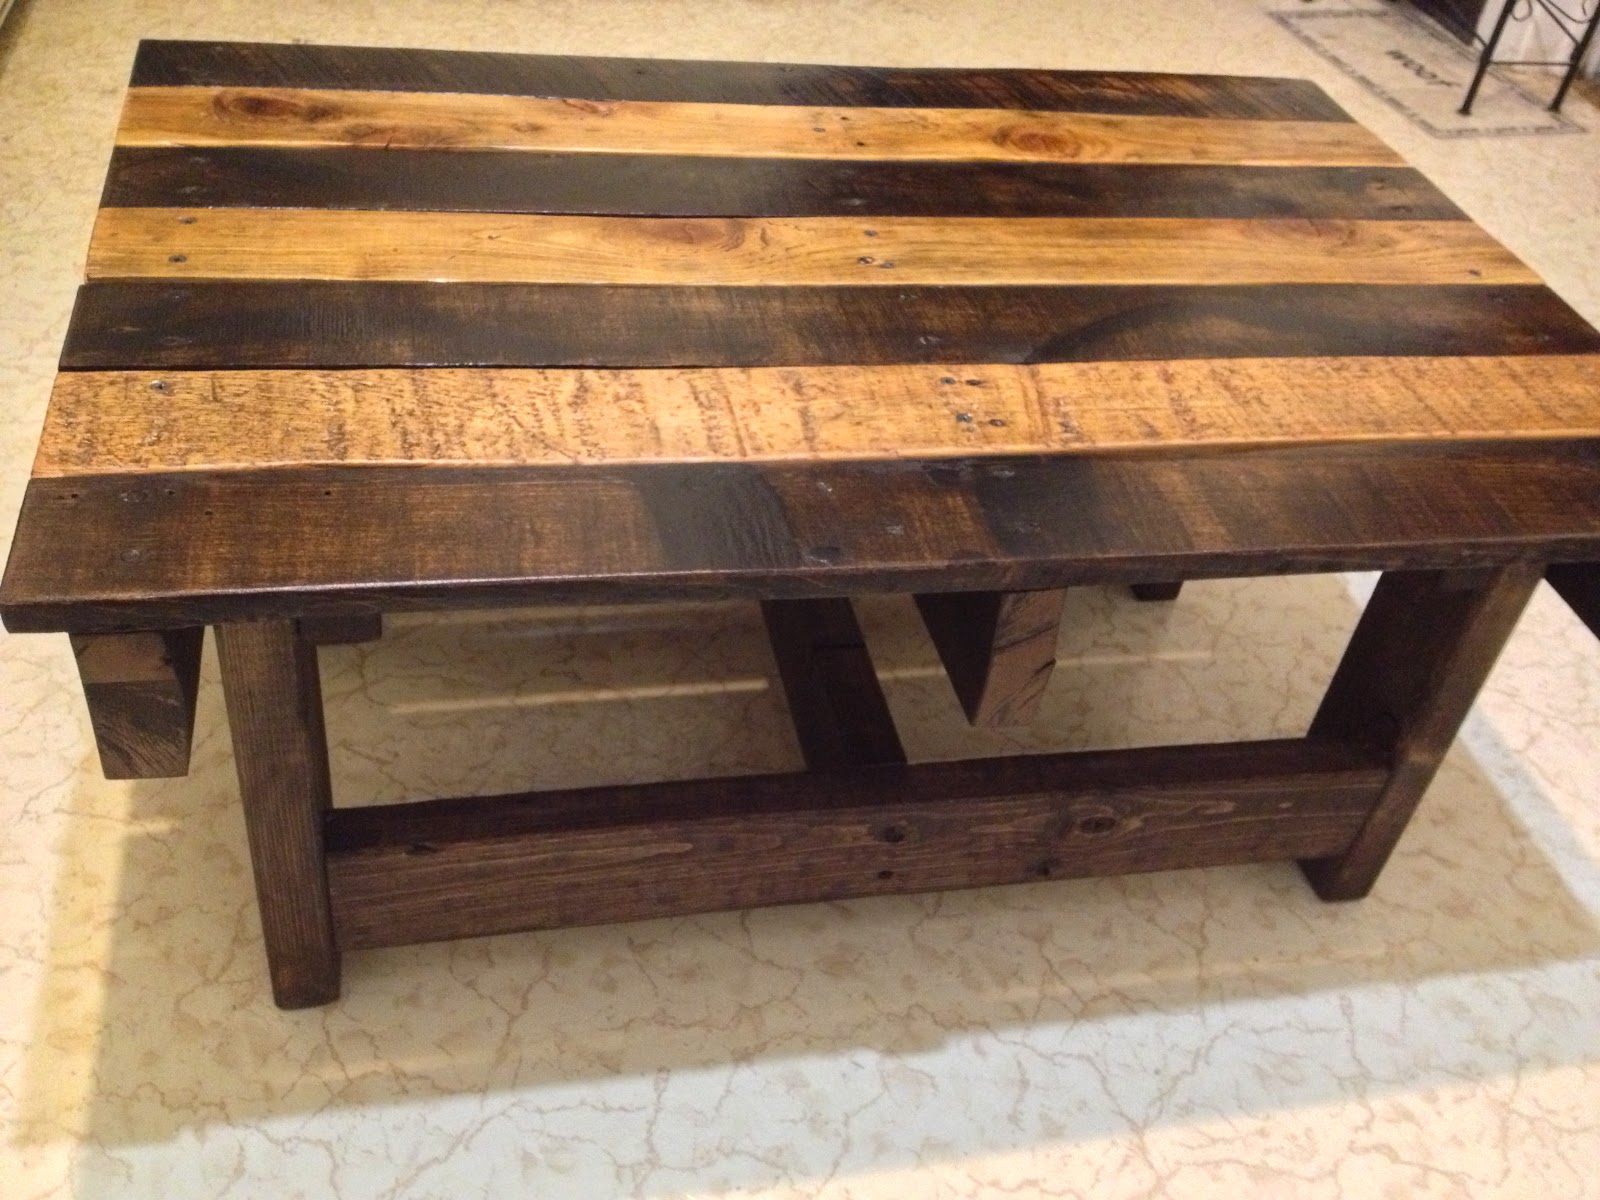 Woodworking reclaimed wood coffee table plans PDF Free Download